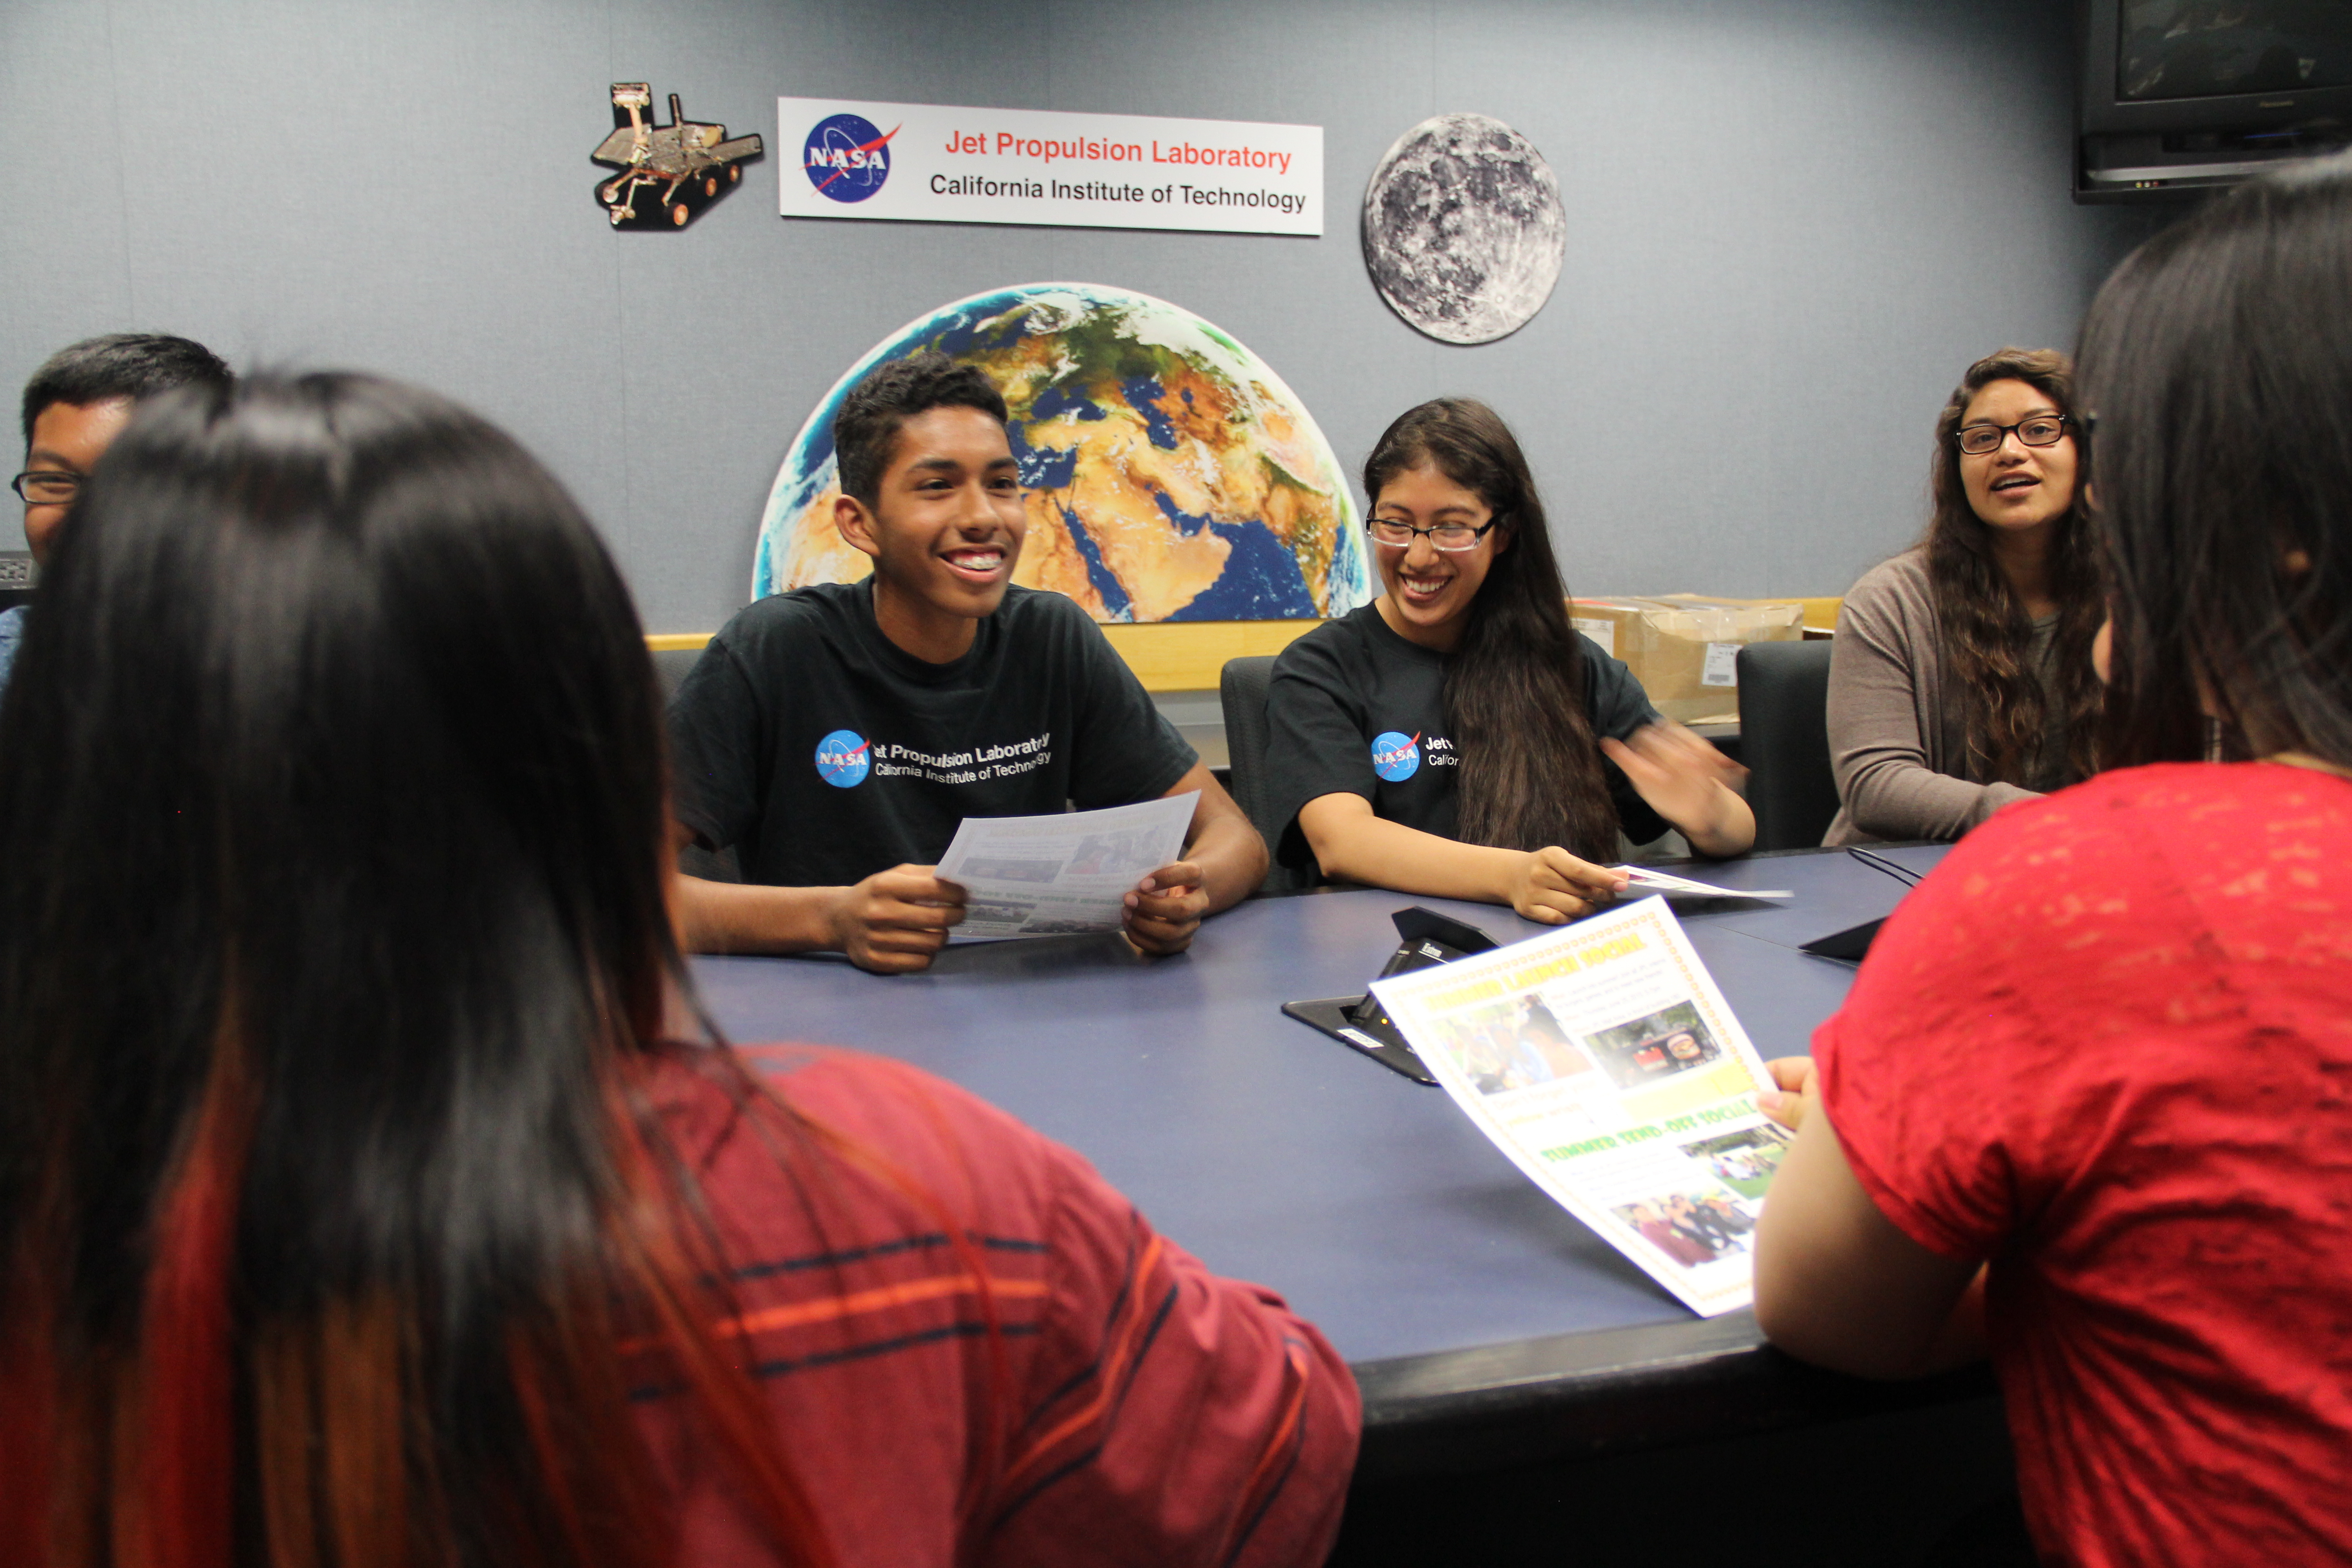 Students at the Jet Propulsion Laboratory